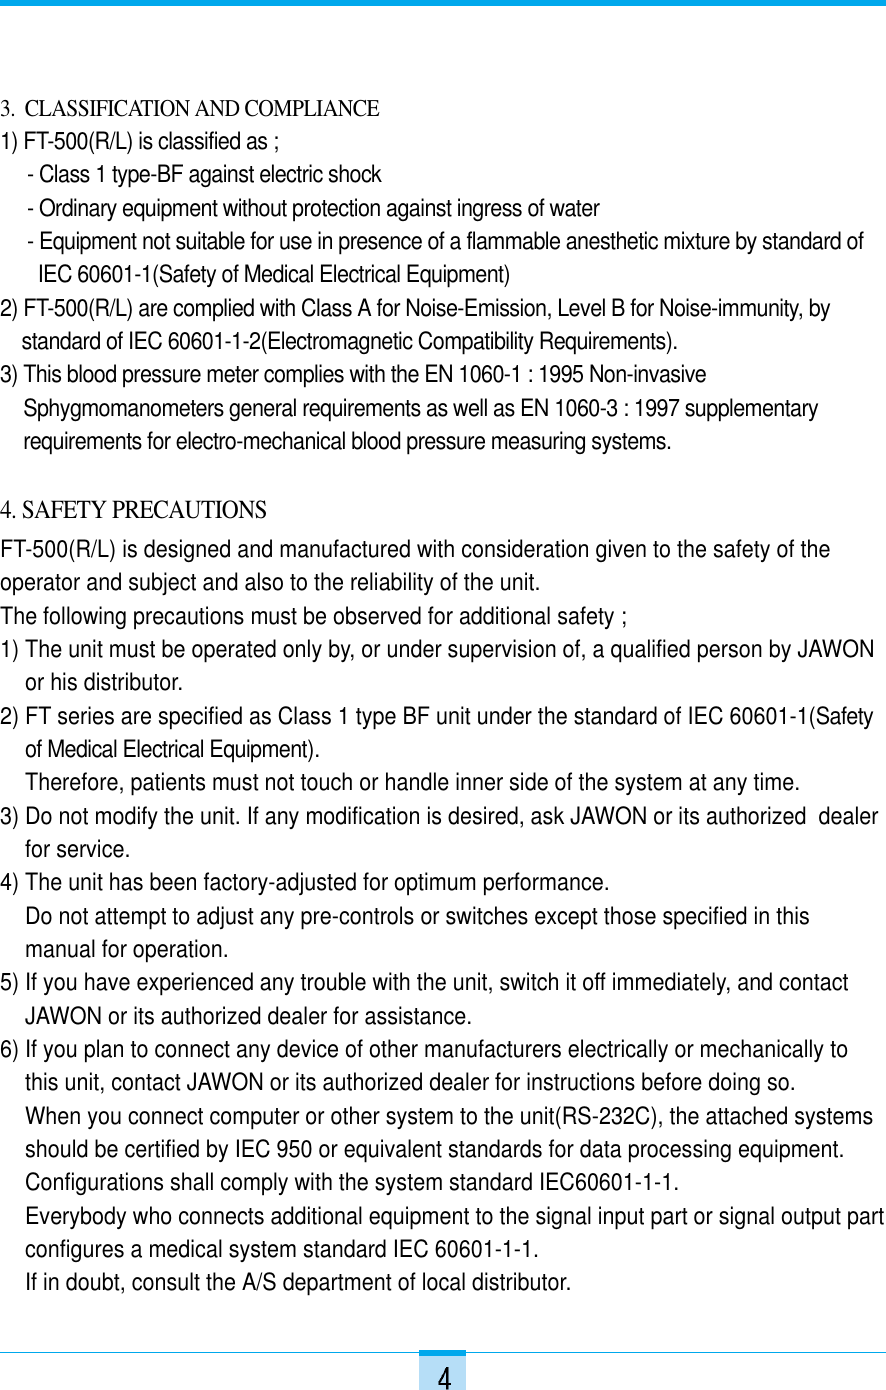 3.  CLASSIFICATION AND COMPLIANCE1) FT-500(R/L) is classified as ;- Class 1 type-BF against electric shock- Ordinary equipment without protection against ingress of water - Equipment not suitable for use in presence of a flammable anesthetic mixture by standard of IEC 60601-1(Safety of Medical Electrical Equipment)2) FT-500(R/L) are complied with Class A for Noise-Emission, Level B for Noise-immunity, by standard of IEC 60601-1-2(Electromagnetic Compatibility Requirements).3) This blood pressure meter complies with the EN 1060-1 : 1995 Non-invasiveSphygmomanometers general requirements as well as EN 1060-3 : 1997 supplementaryrequirements for electro-mechanical blood pressure measuring systems.4. SAFETY PRECAUTIONSFT-500(R/L) is designed and manufactured with consideration given to the safety of theoperator and subject and also to the reliability of the unit.The following precautions must be observed for additional safety ;1) The unit must be operated only by, or under supervision of, a qualified person by JAWONor his distributor.2) FT series are specified as Class 1 type BF unit under the standard of IEC 60601-1(Safetyof Medical Electrical Equipment).Therefore, patients must not touch or handle inner side of the system at any time.3) Do not modify the unit. If any modification is desired, ask JAWON or its authorized  dealerfor service.4) The unit has been factory-adjusted for optimum performance.Do not attempt to adjust any pre-controls or switches except those specified in thismanual for operation.5) If you have experienced any trouble with the unit, switch it off immediately, and contactJAWON or its authorized dealer for assistance.6) If you plan to connect any device of other manufacturers electrically or mechanically tothis unit, contact JAWON or its authorized dealer for instructions before doing so.When you connect computer or other system to the unit(RS-232C), the attached systemsshould be certified by IEC 950 or equivalent standards for data processing equipment.Configurations shall comply with the system standard IEC60601-1-1. Everybody who connects additional equipment to the signal input part or signal output partconfigures a medical system standard IEC 60601-1-1.If in doubt, consult the A/S department of local distributor.